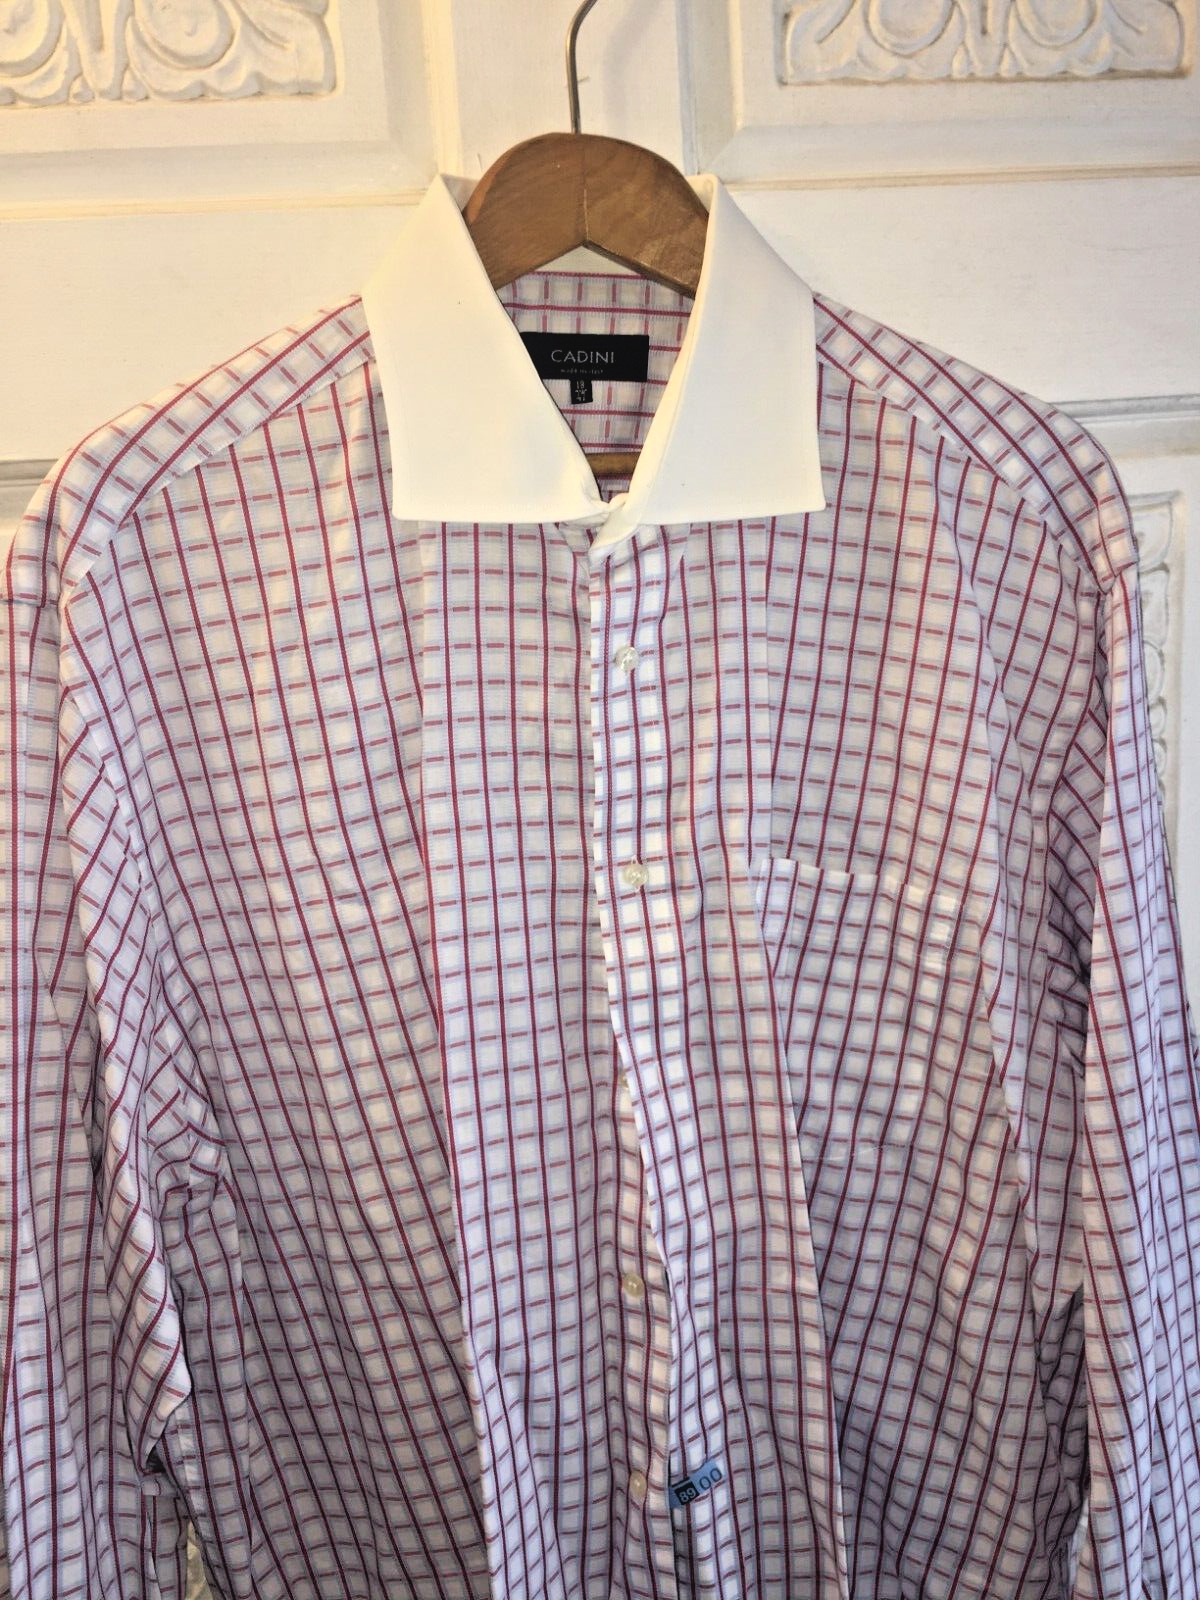 Primary image for Cadini Men's Shirt Size 19 Cotton Italy Button Up Check Pattern SEE DESCRIPTION